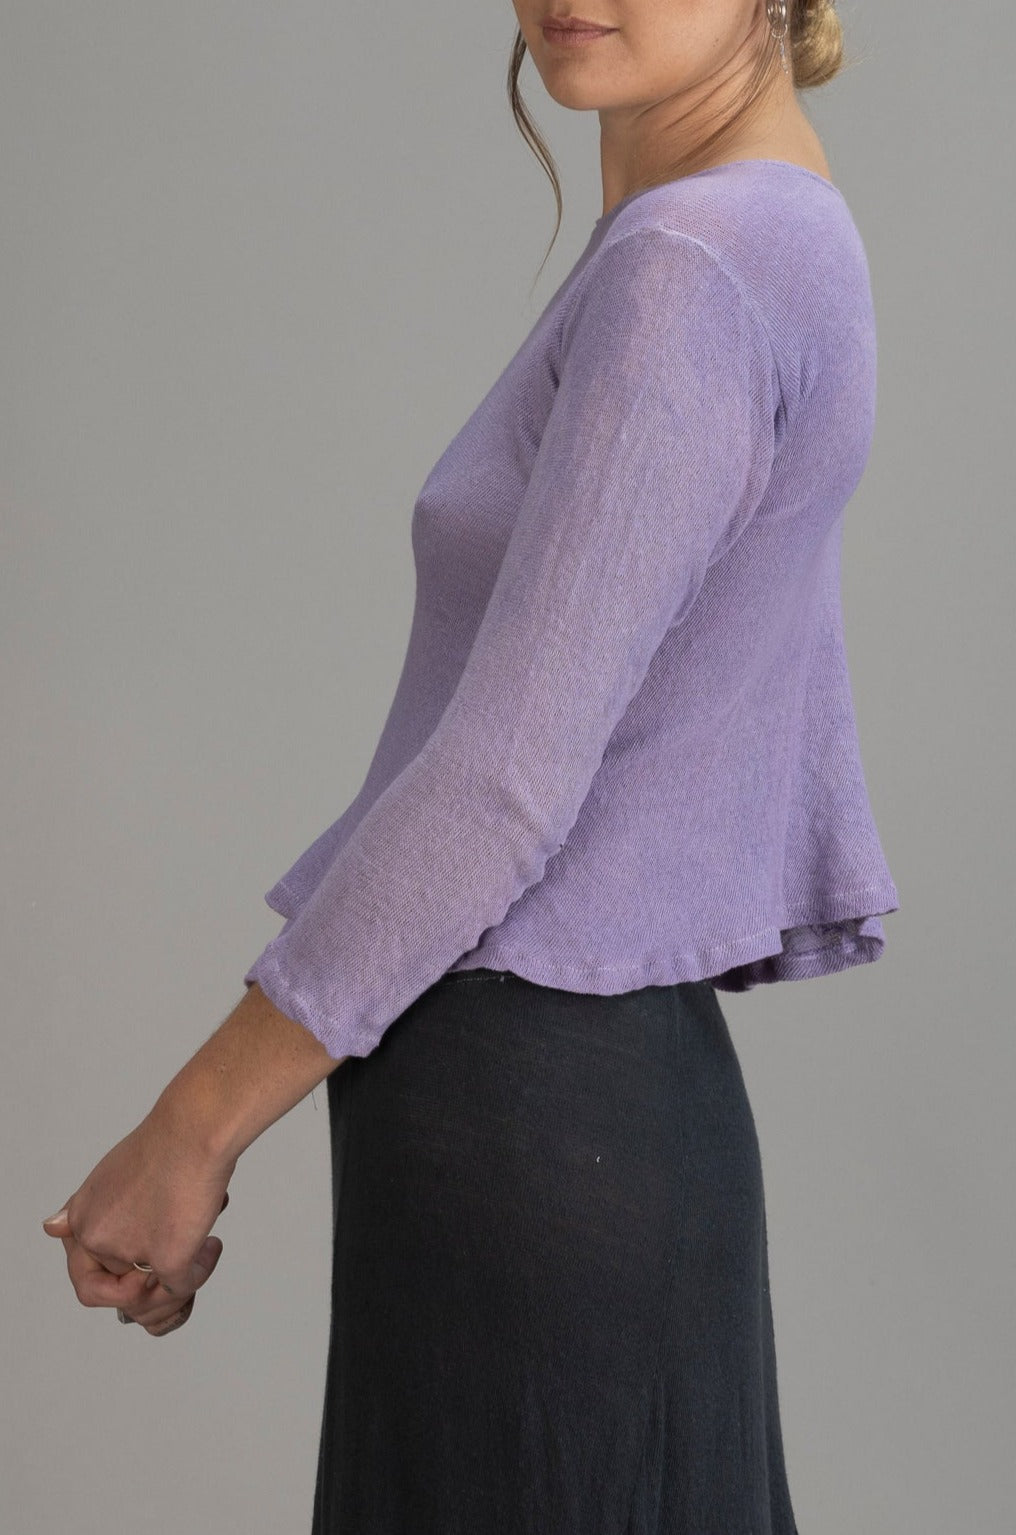 AMORE TOP - Lilac